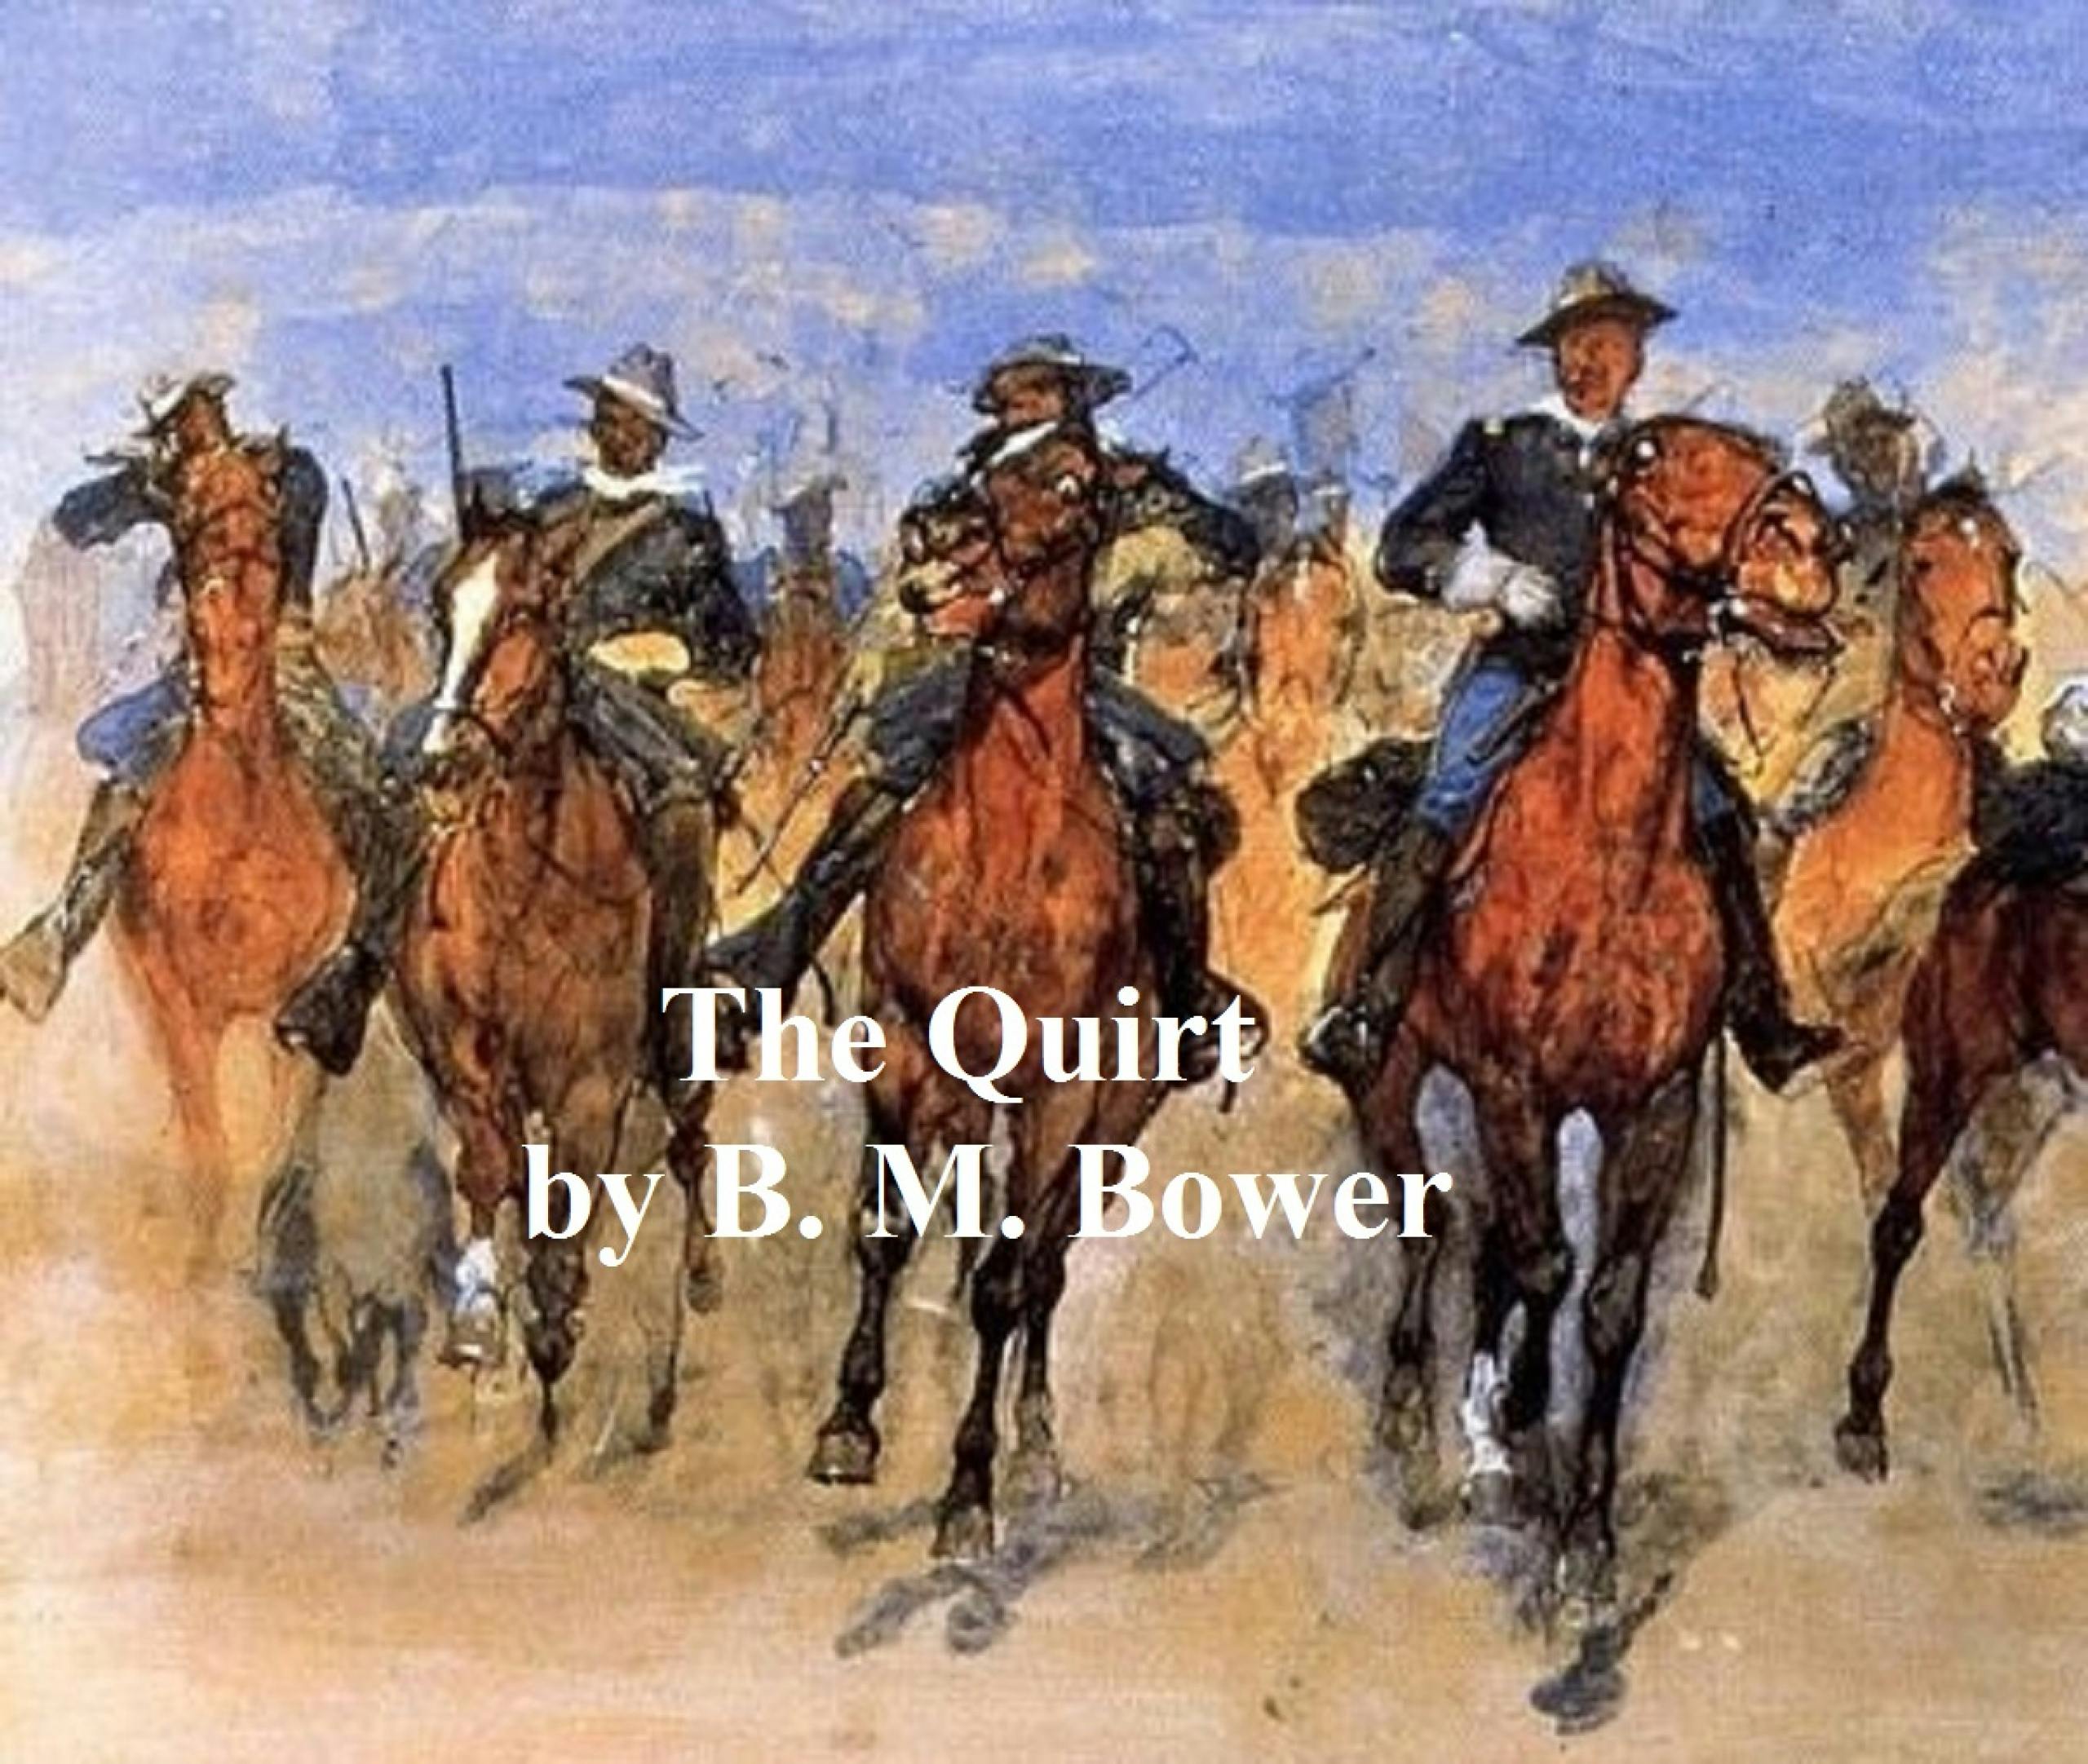 The Quirt - B. M. Bower